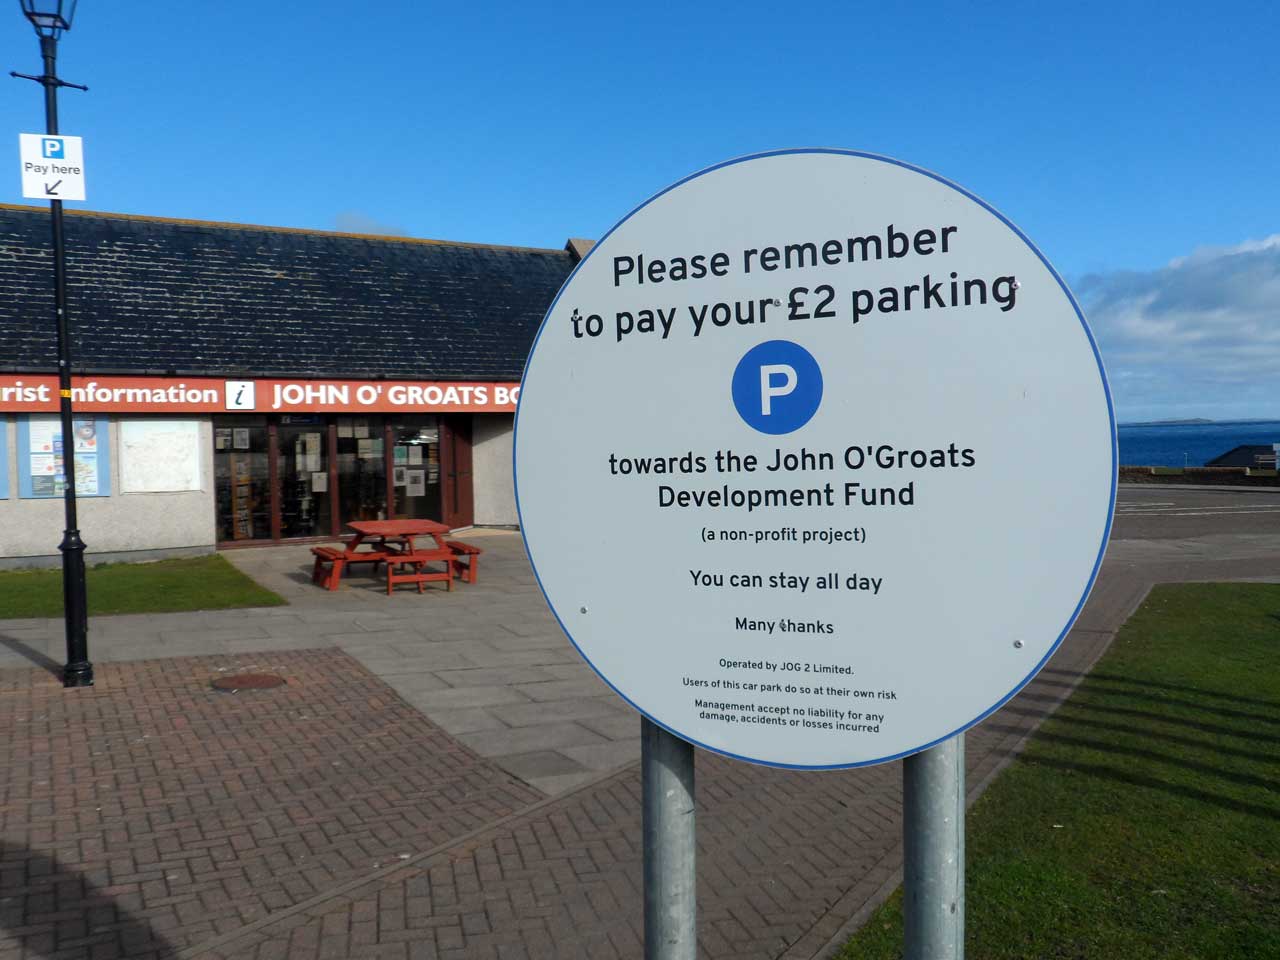 Photo: John O'Groats Getting Busier After The Pandemic